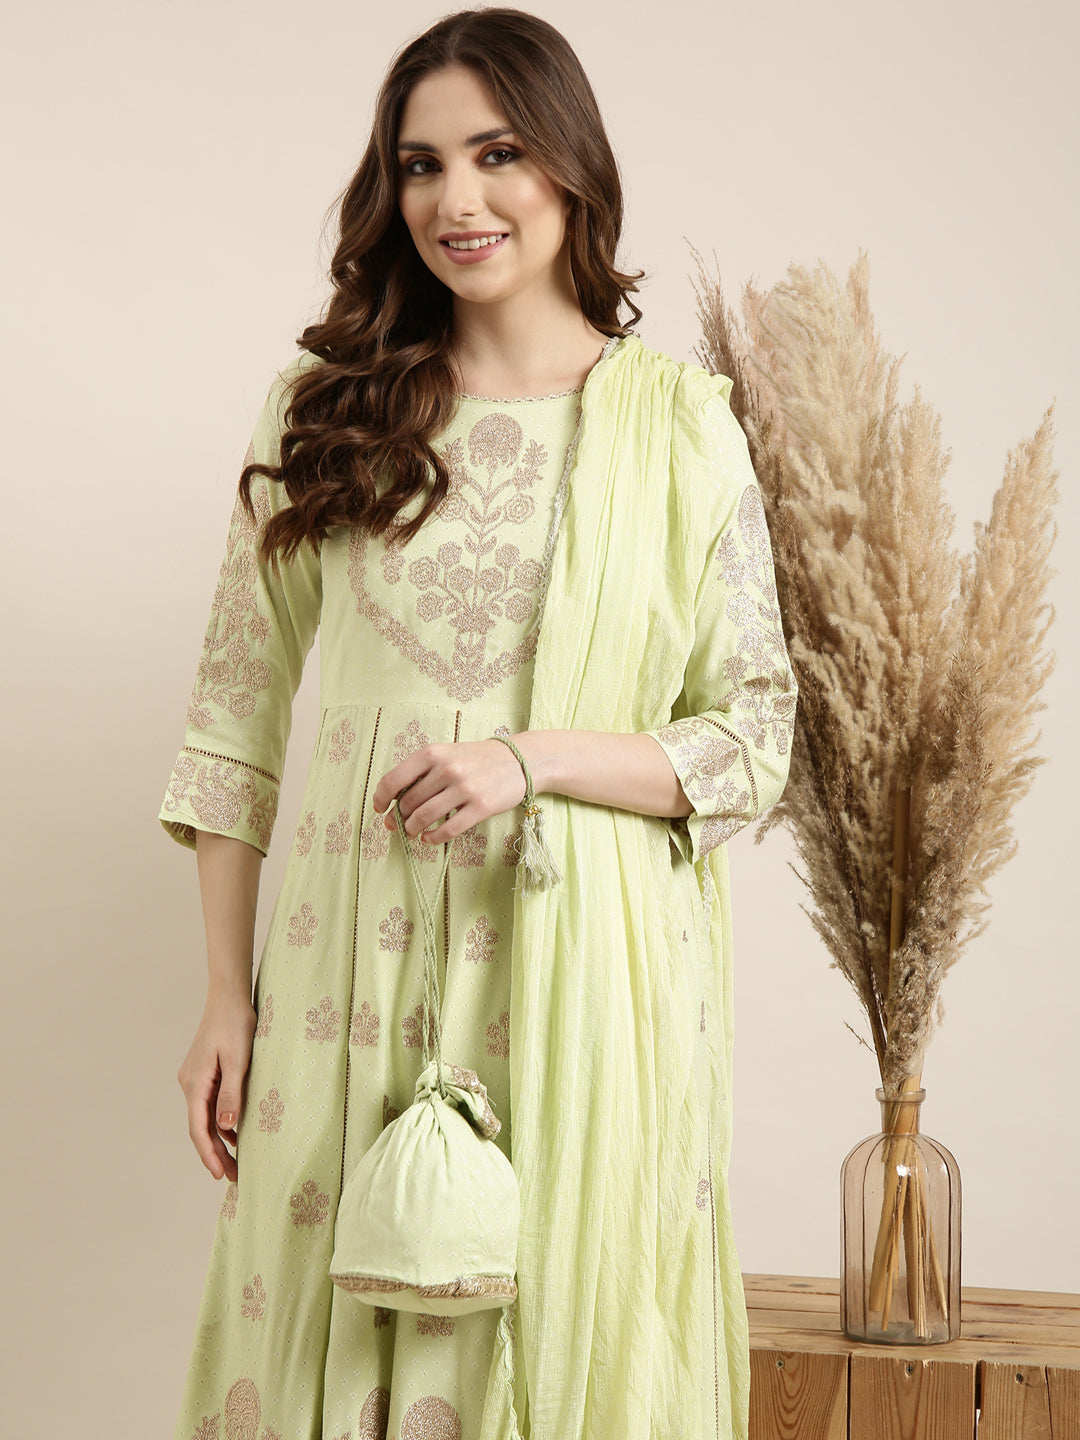 Women Anarkali Green Floral Kurta and Trousers Set Comes With Dupatta and Potli Bag